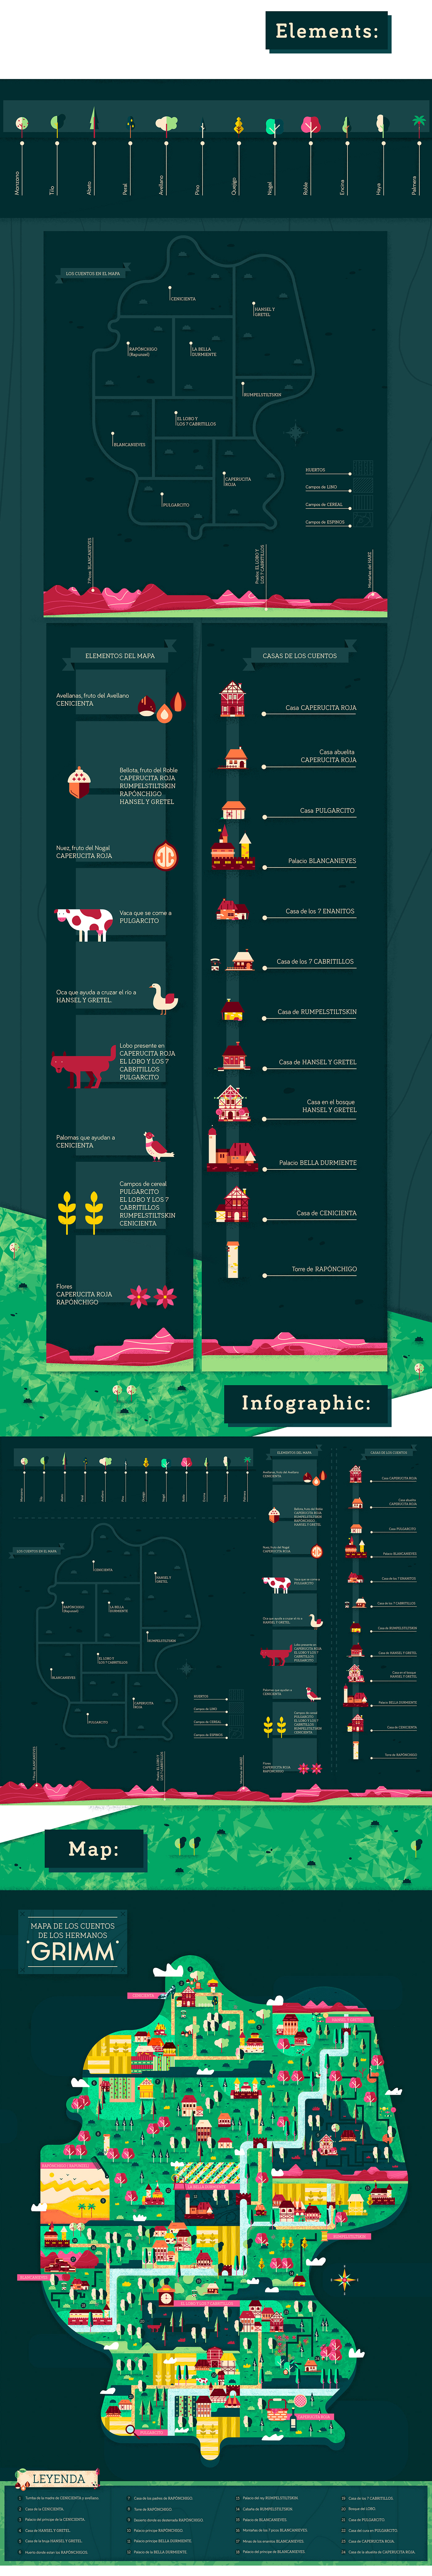 grimm brothers infographic icons flat illustration design map fairytale graphic ILLUSTRATION 